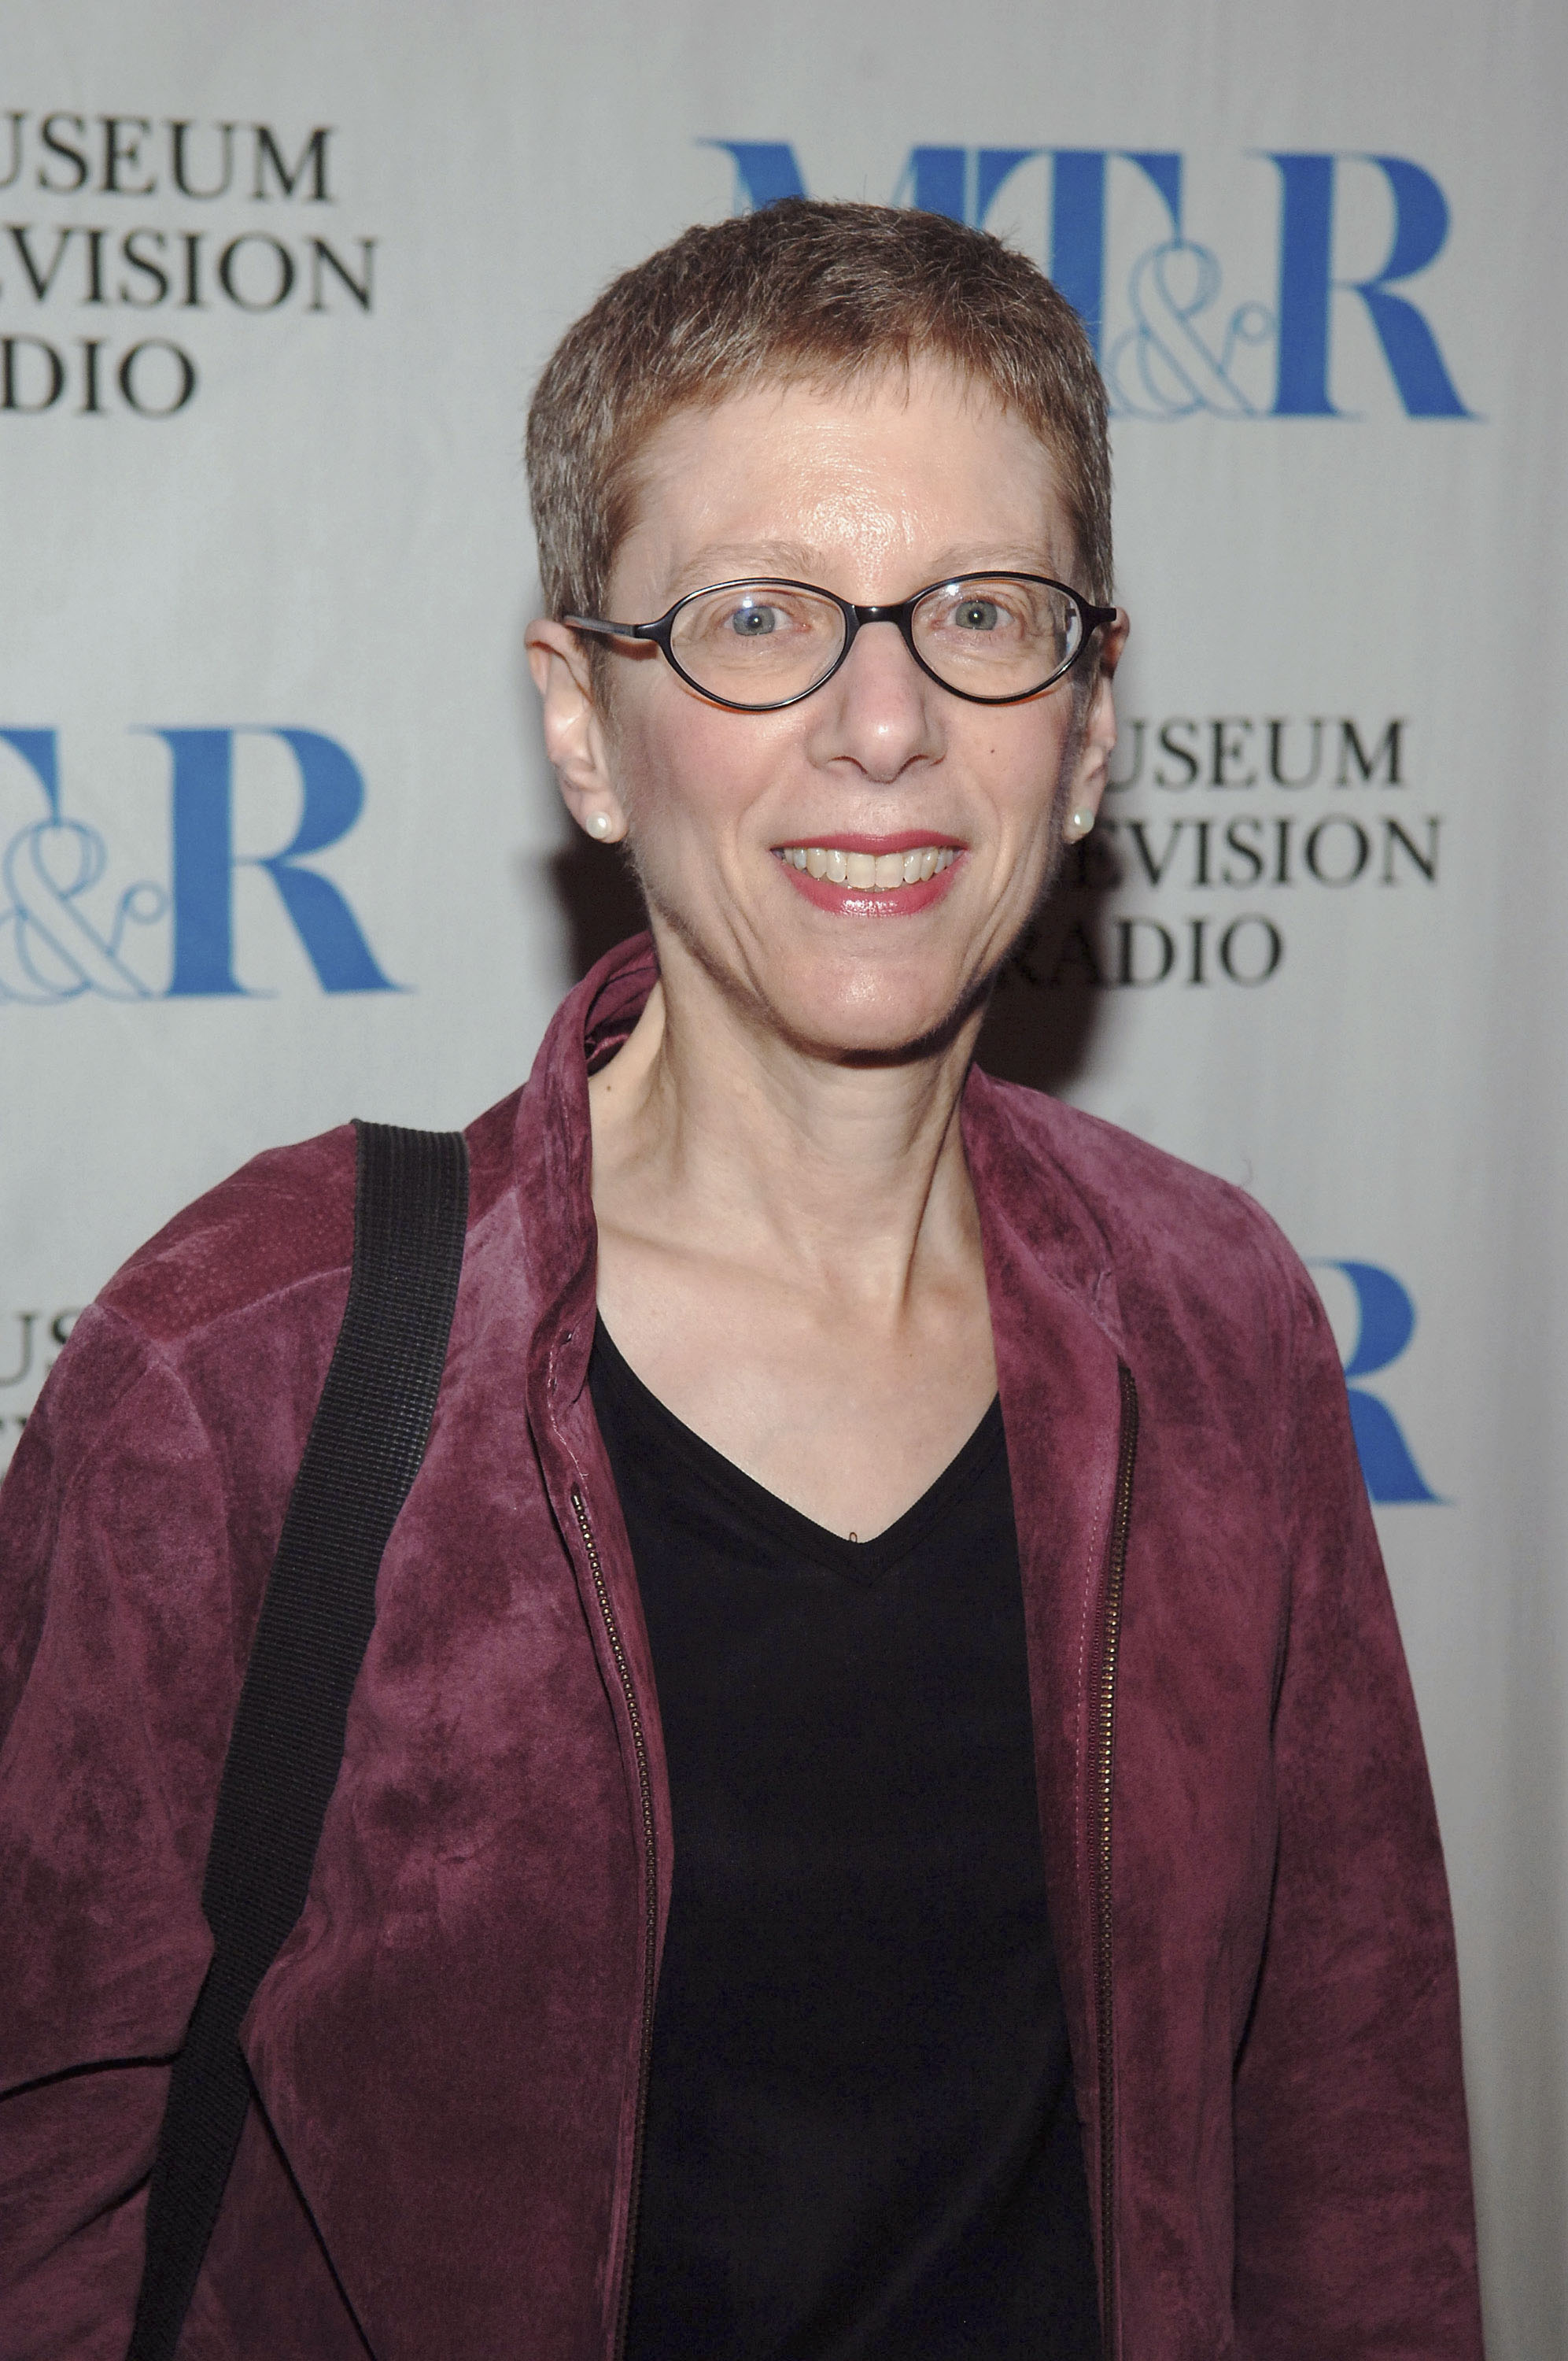 Terry Gross at the launch party for "She Made It: Women Creating Television and Radio" in New York City on Dec. 1, 2005.